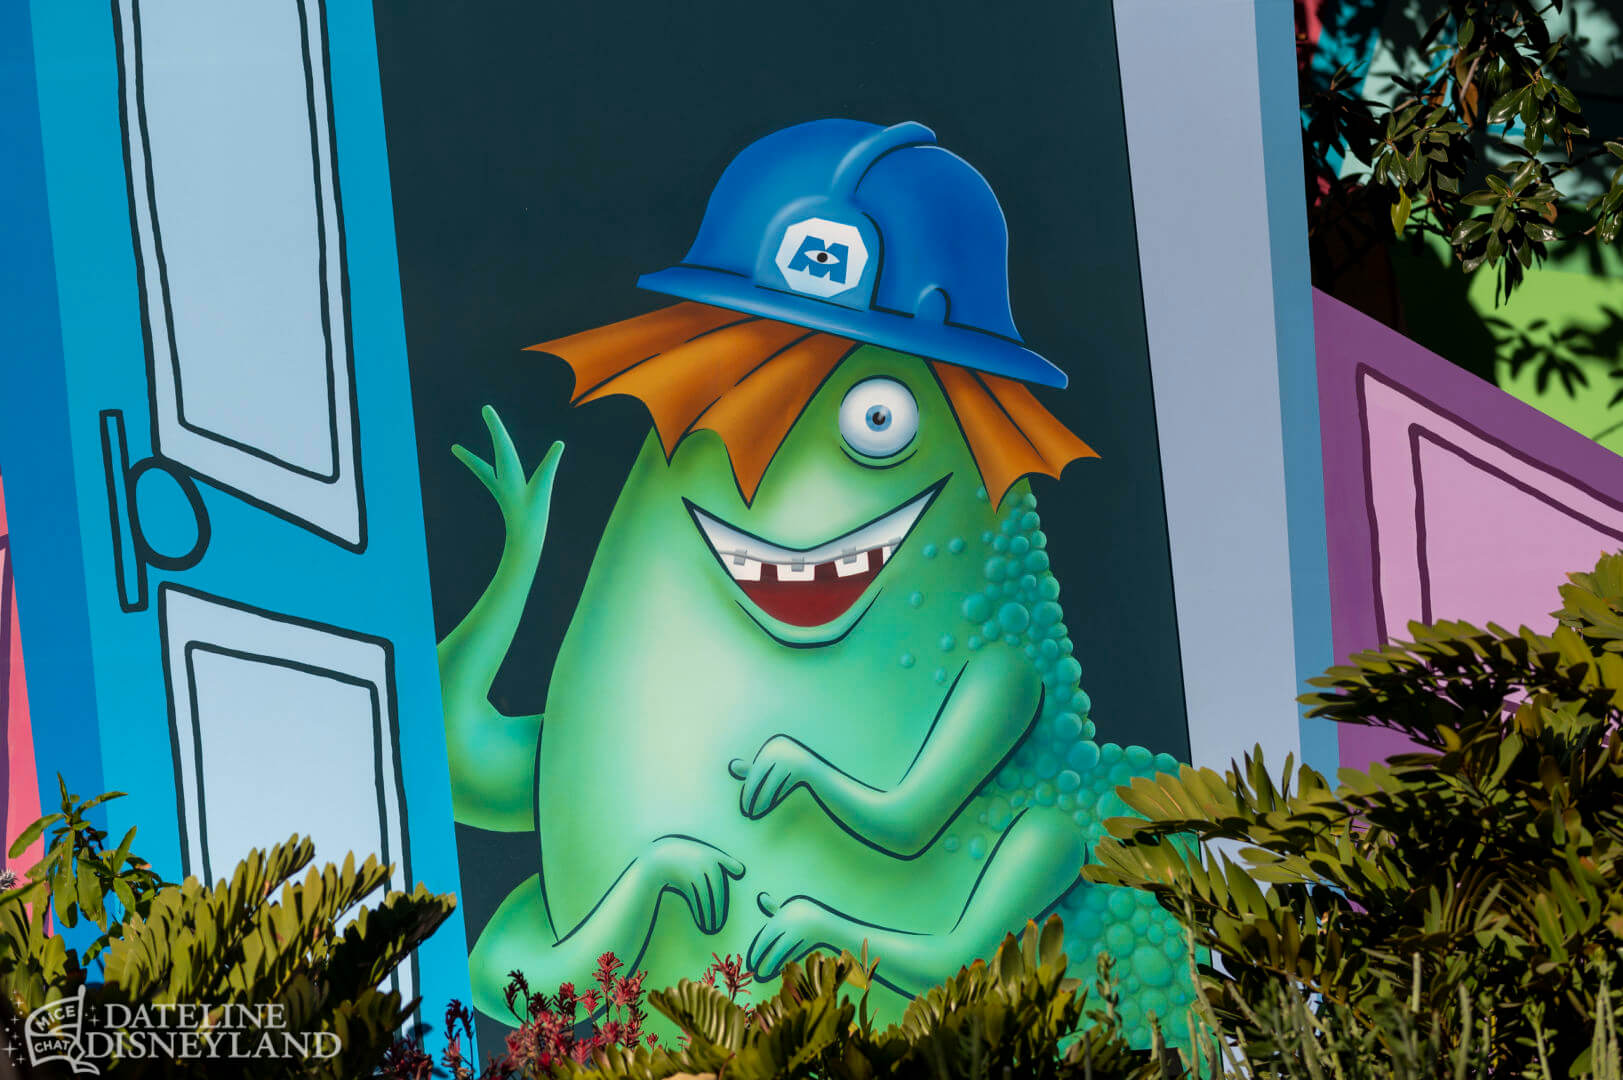 Pictures: Monsters Inc Mike and Sulley to the Rescue Facade - The